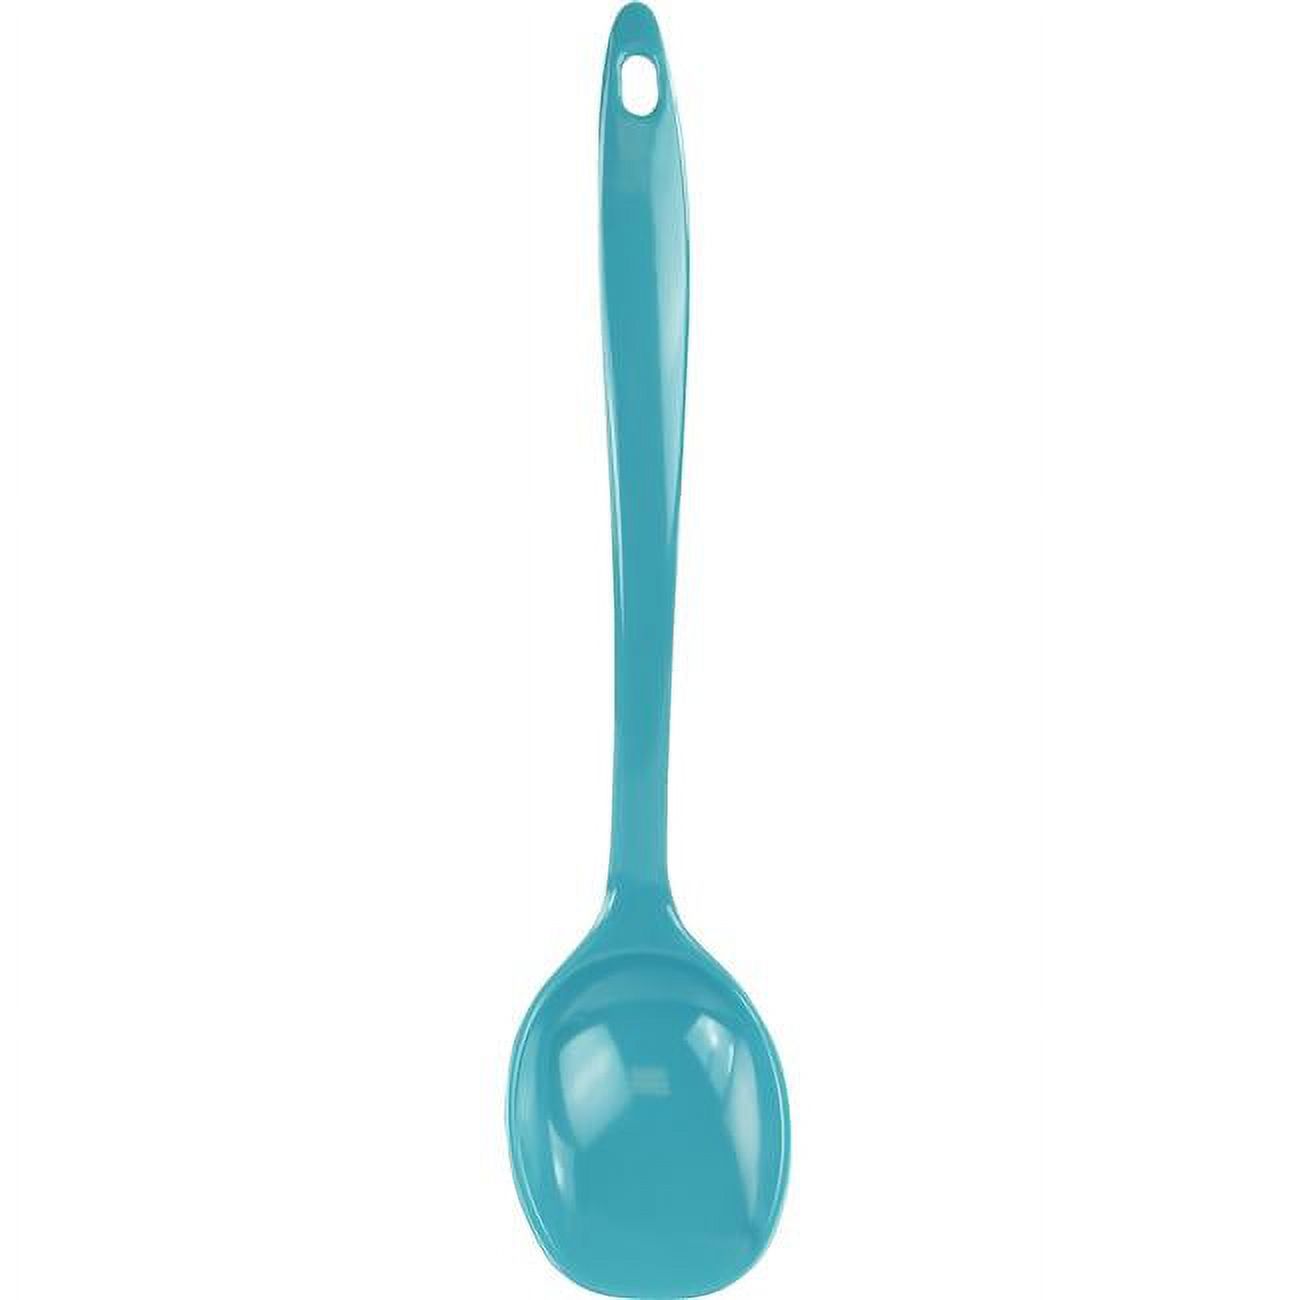 100% Organic Melamine Kitchen Cooking Spoon, Turquoise - image 1 of 2